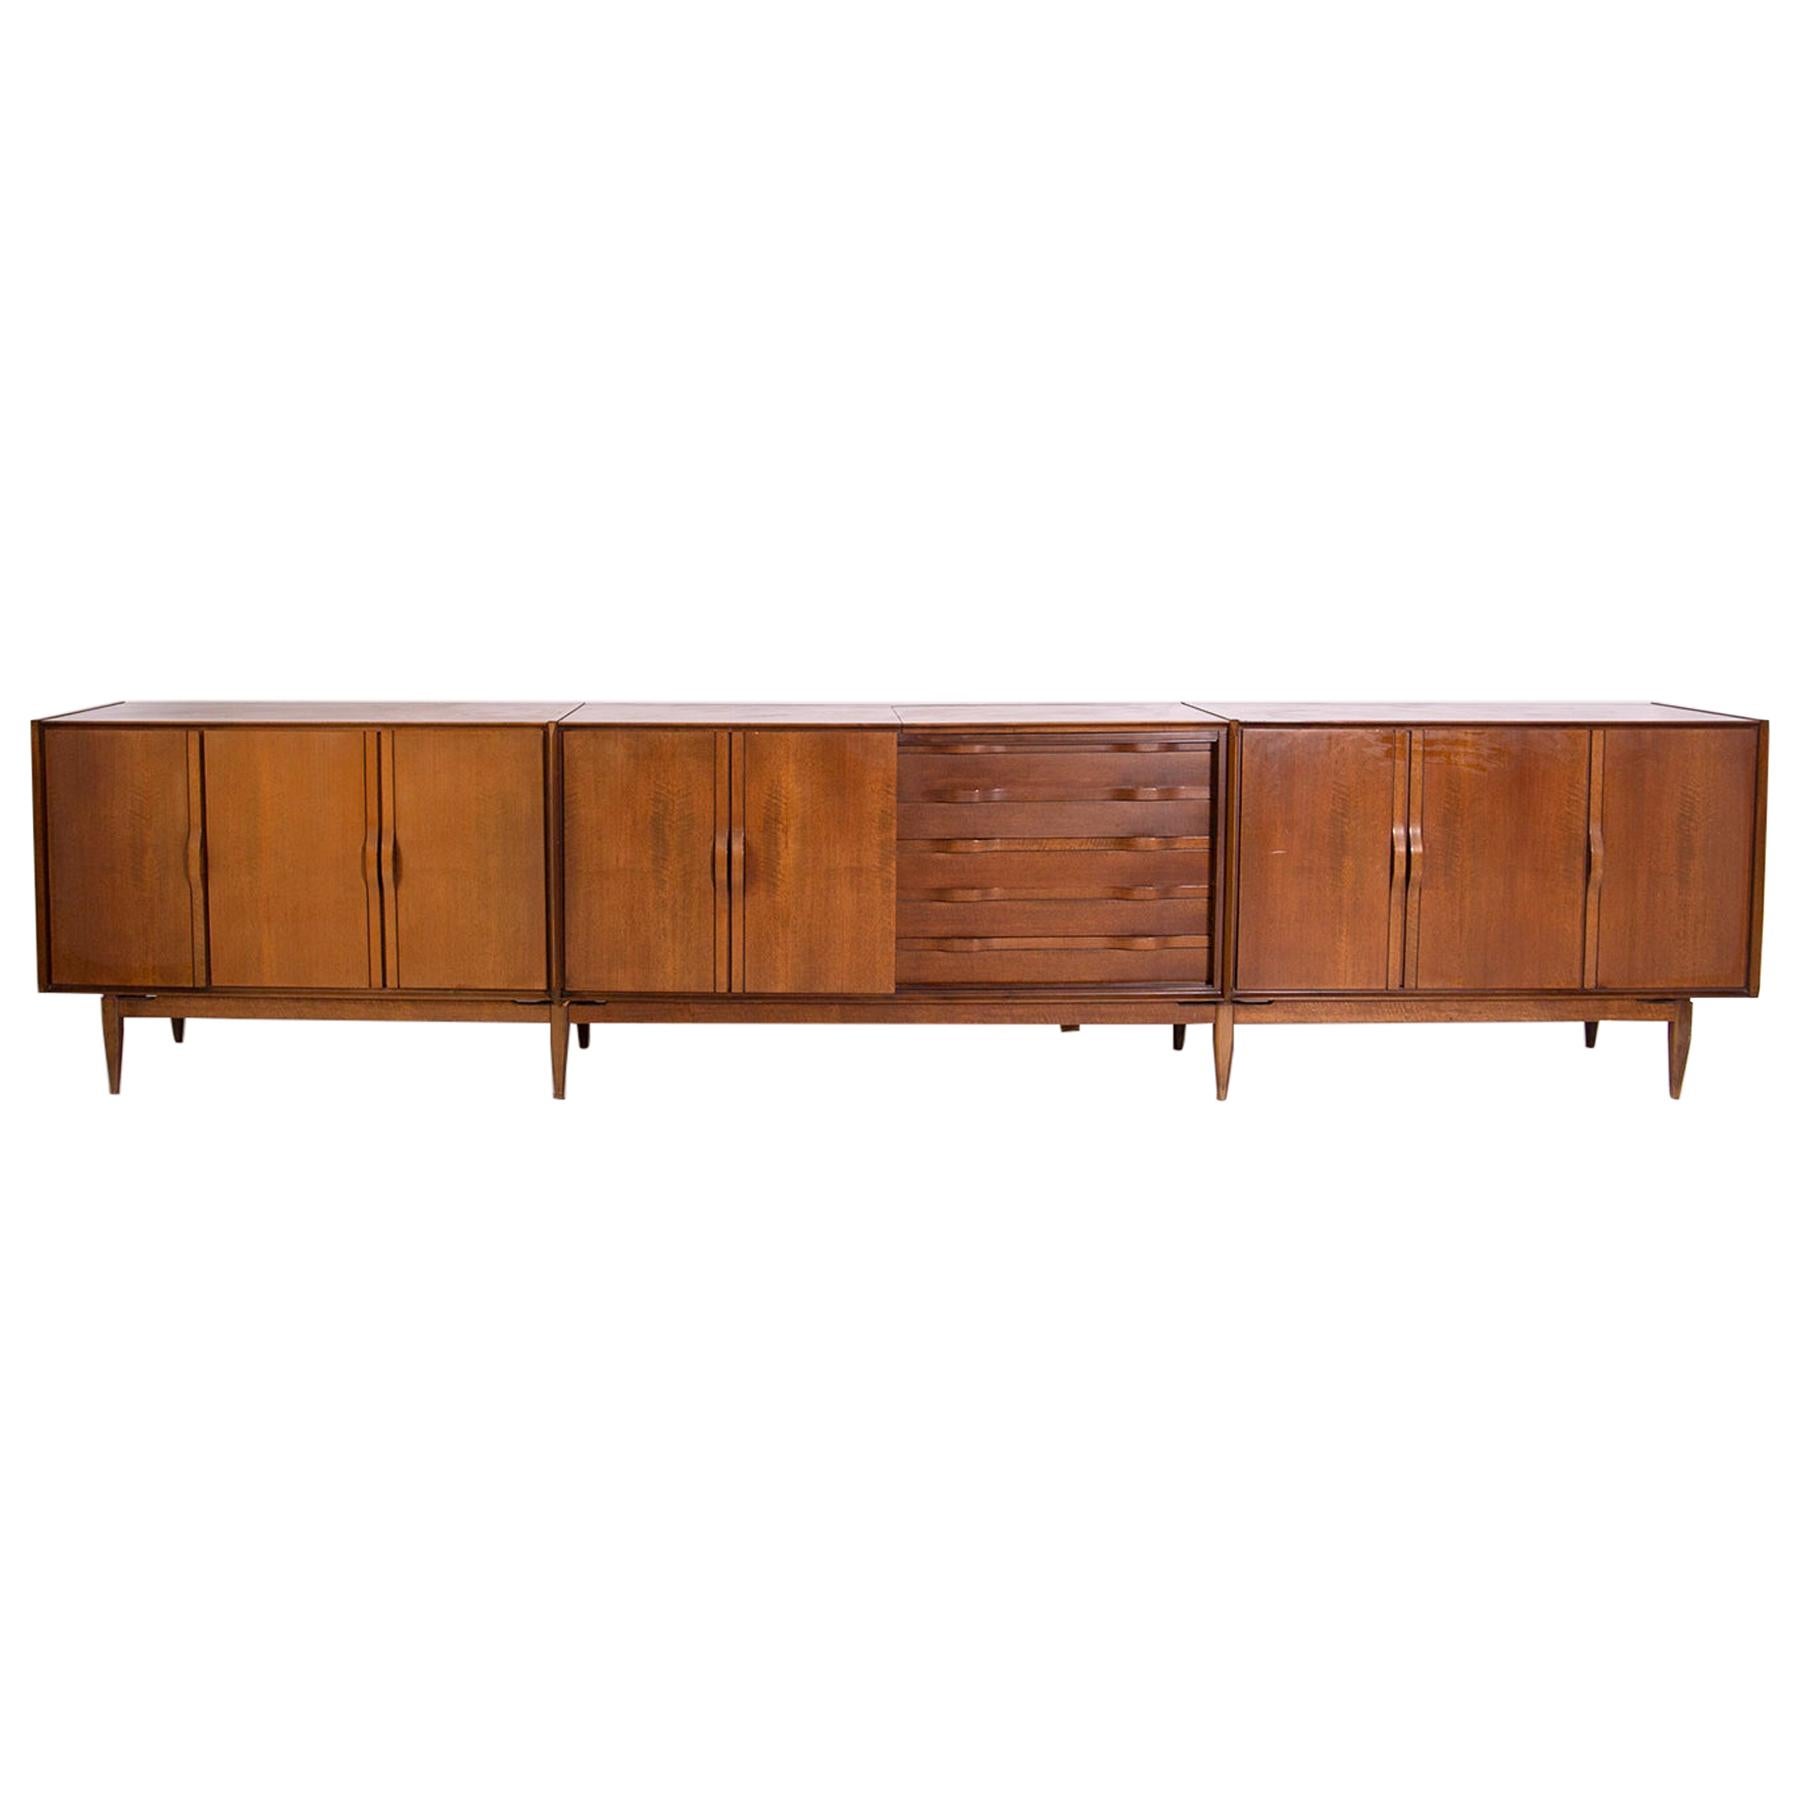 Large Italian Sideboard in Walnut from the 1950s